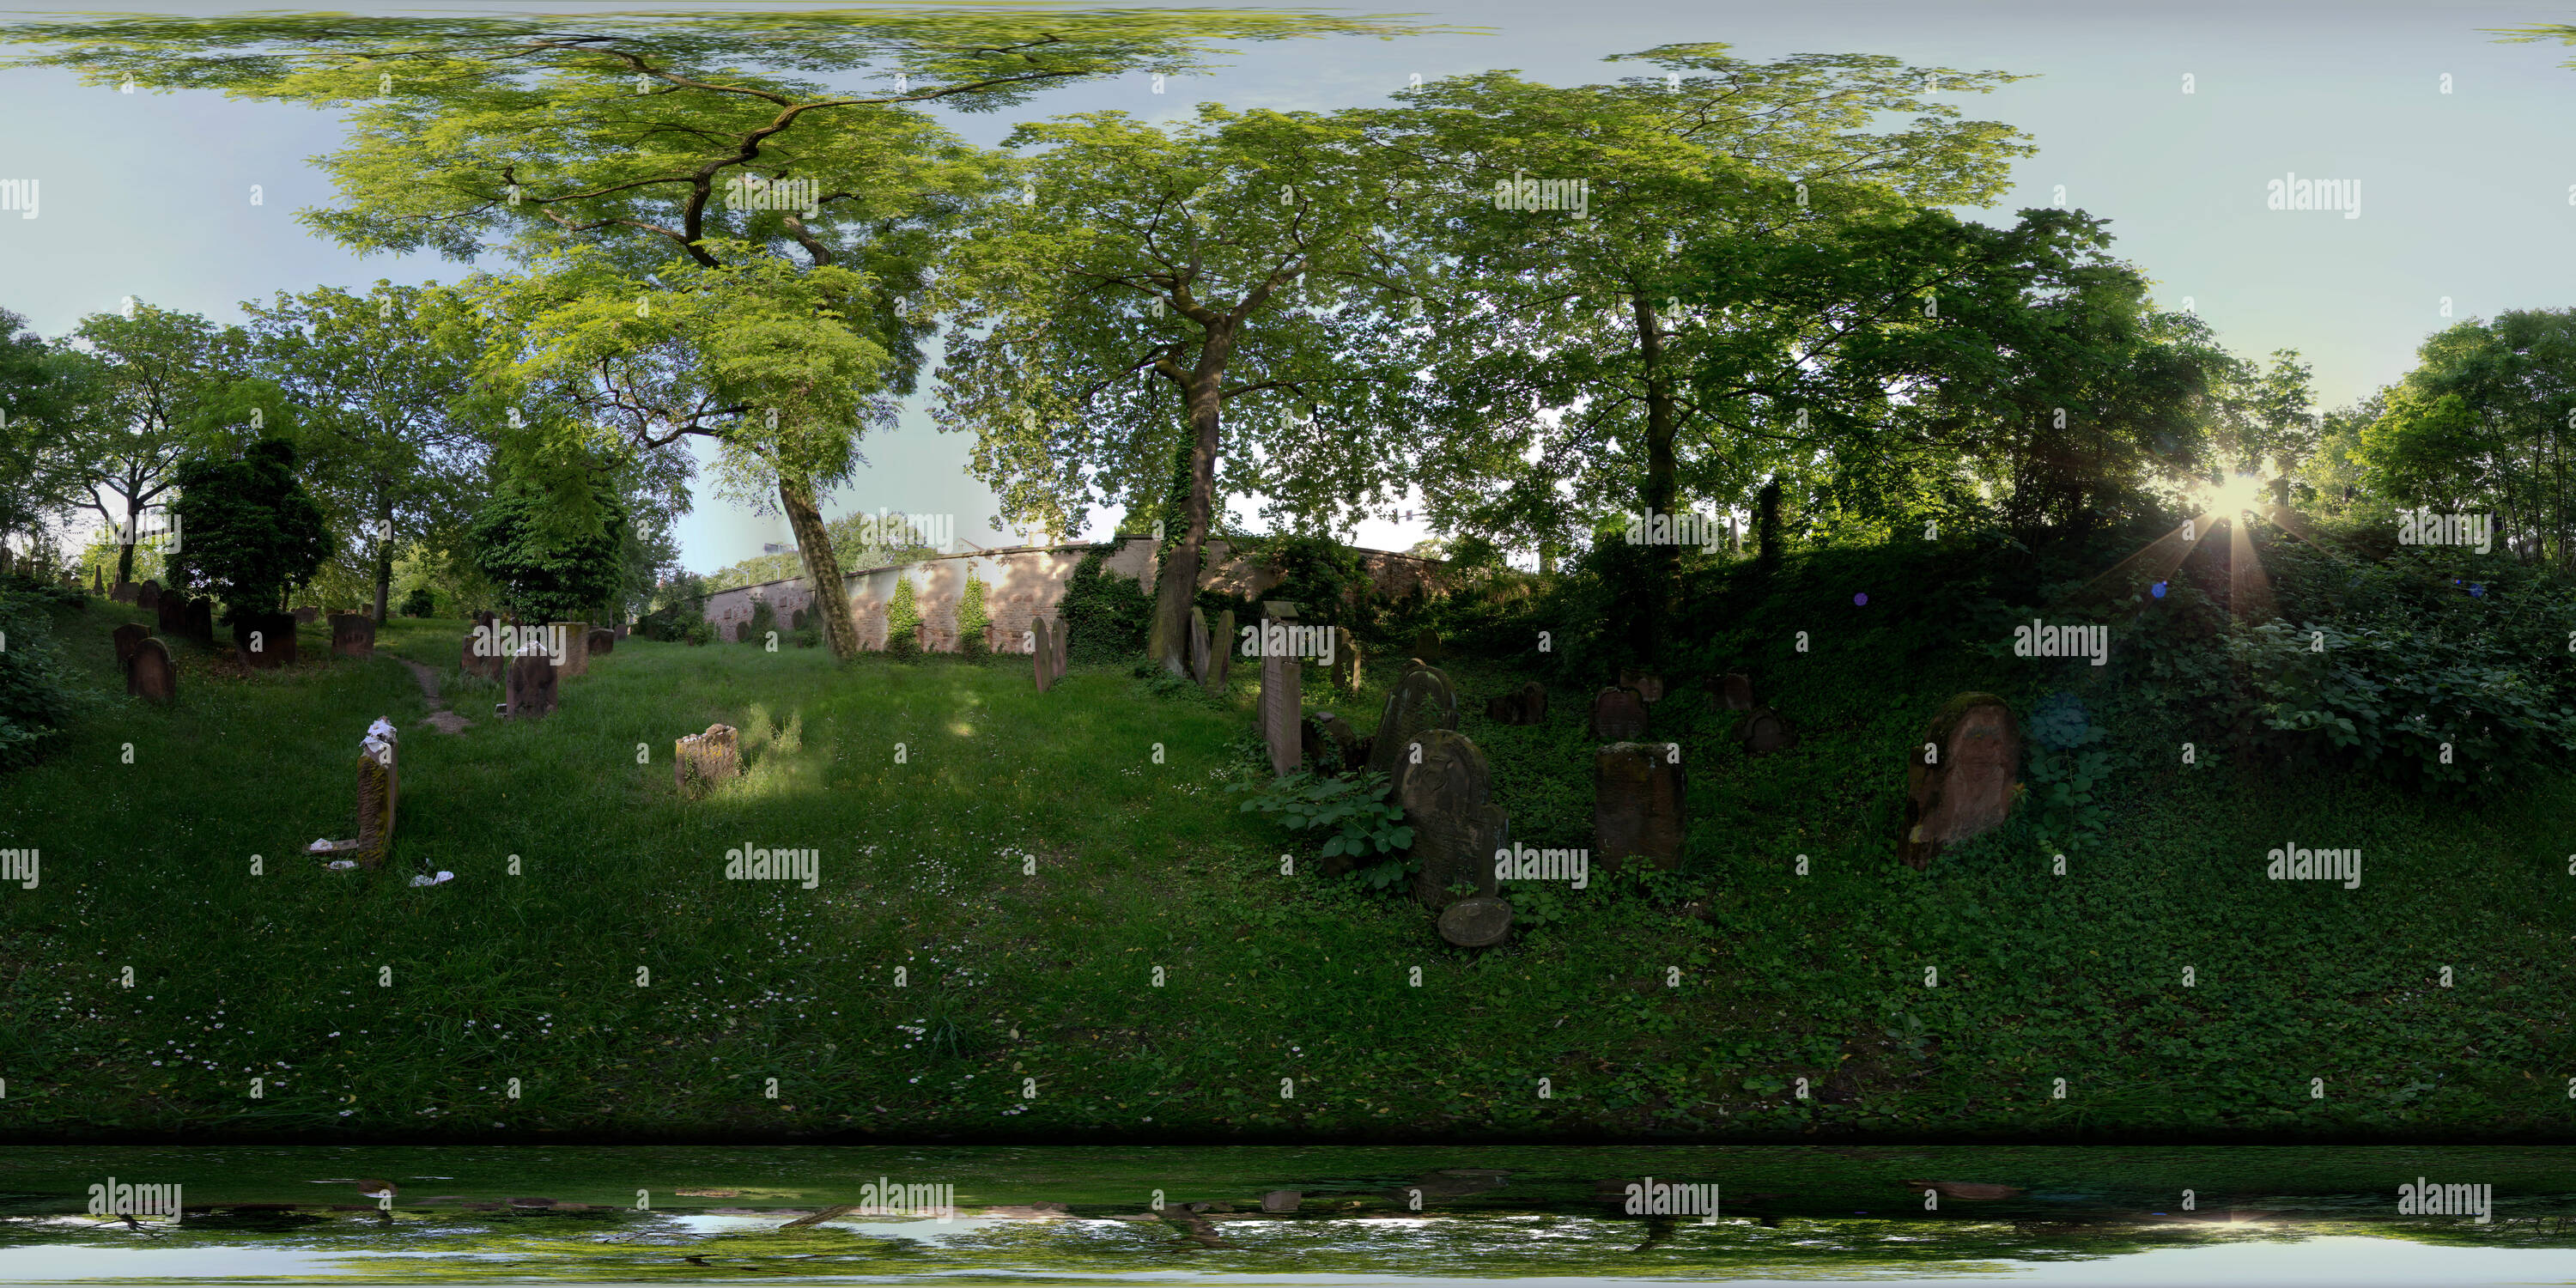 360 degree panoramic view of Jewish Cemetery (Heiliger Sand) 2, Worms, 2016-06, freehand